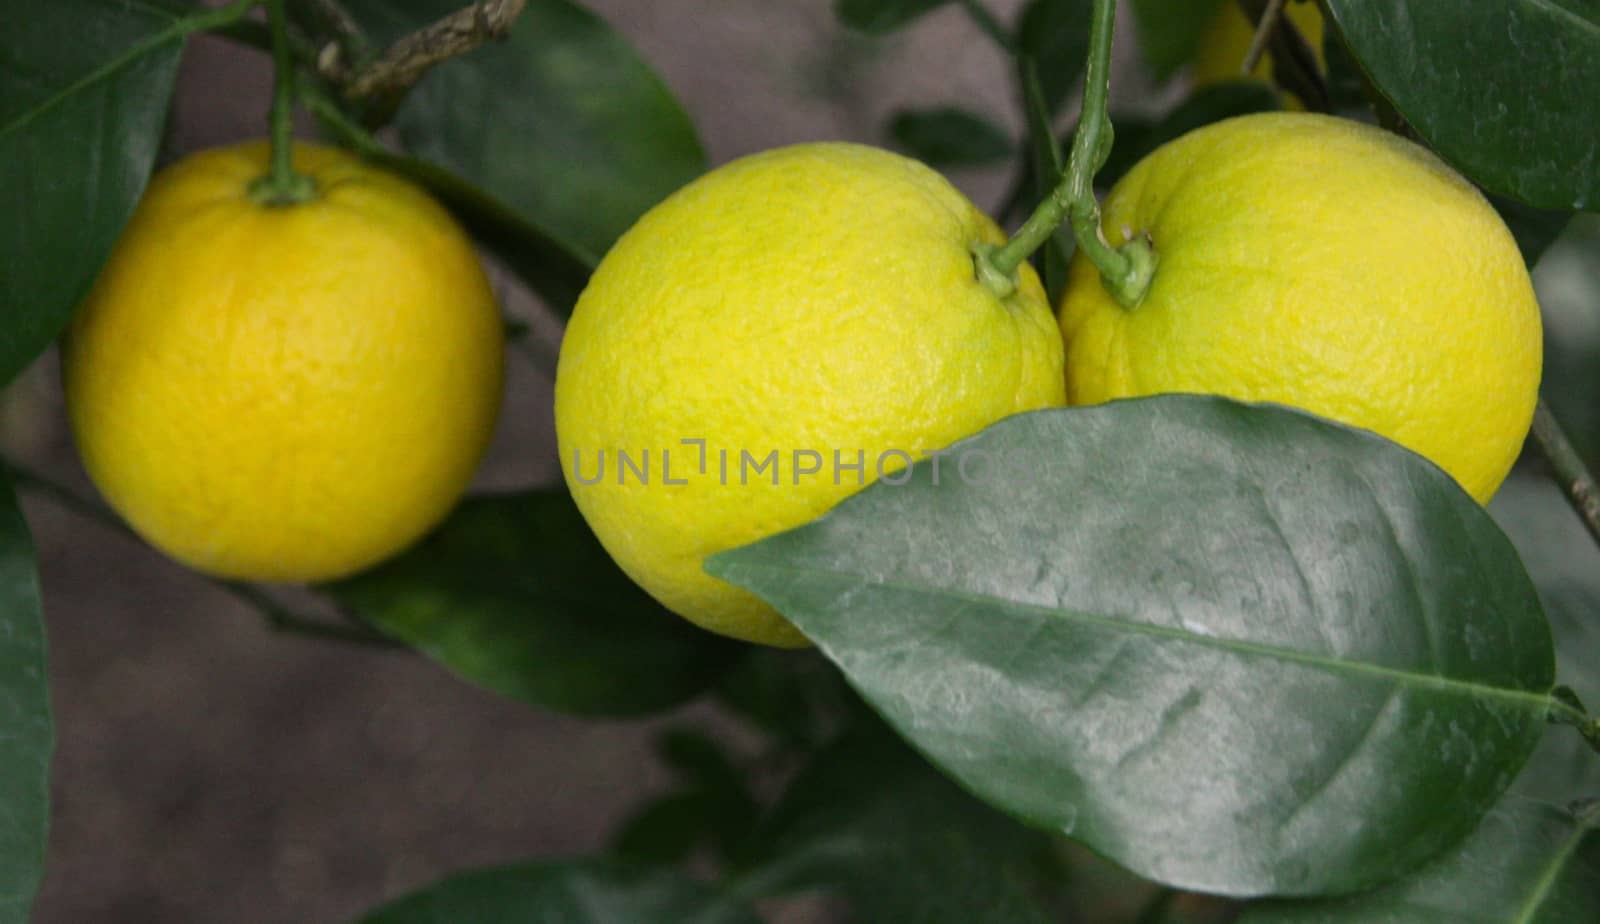 Ripe yellow lemons hanging on tree and green leaves